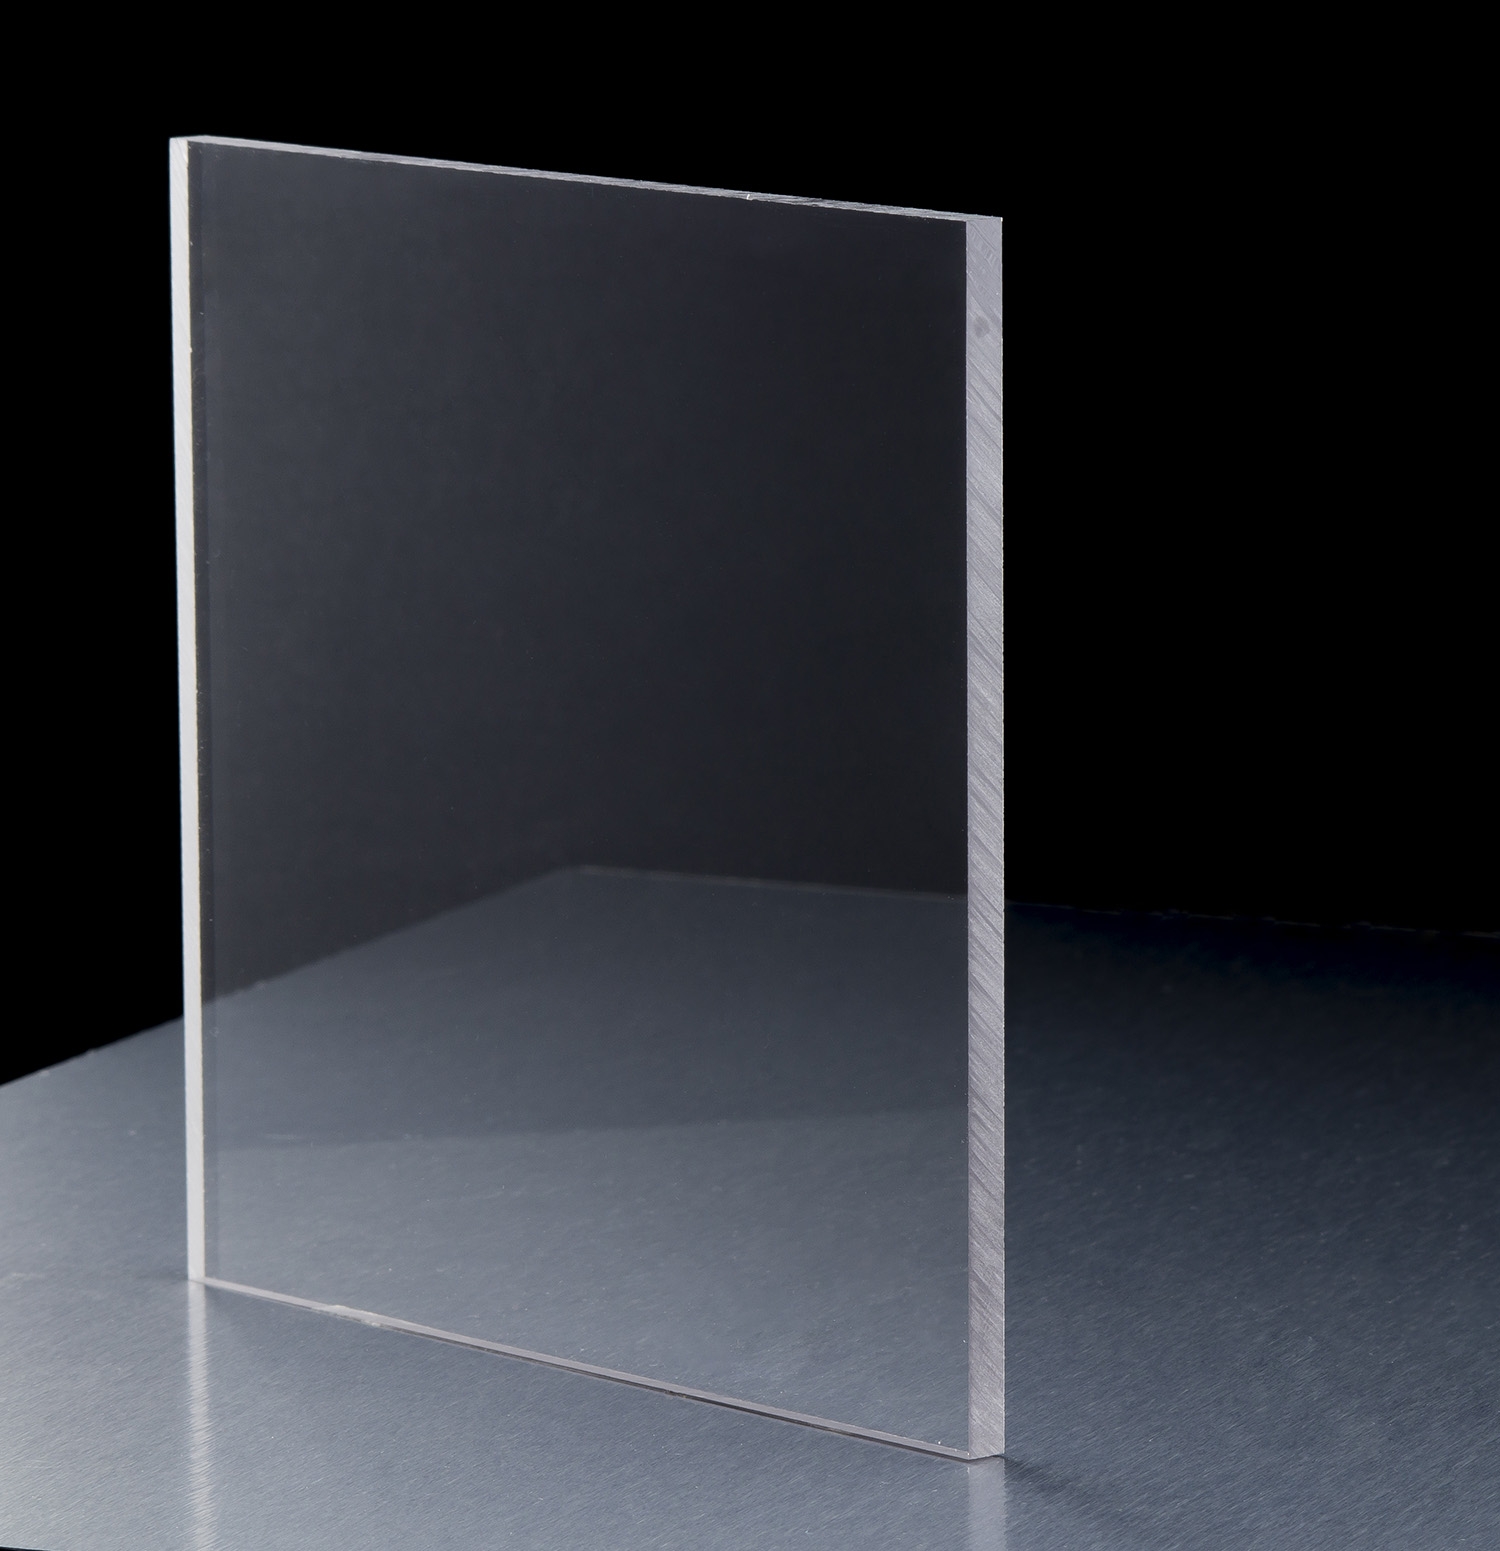 Clear Polycarbonate sheet